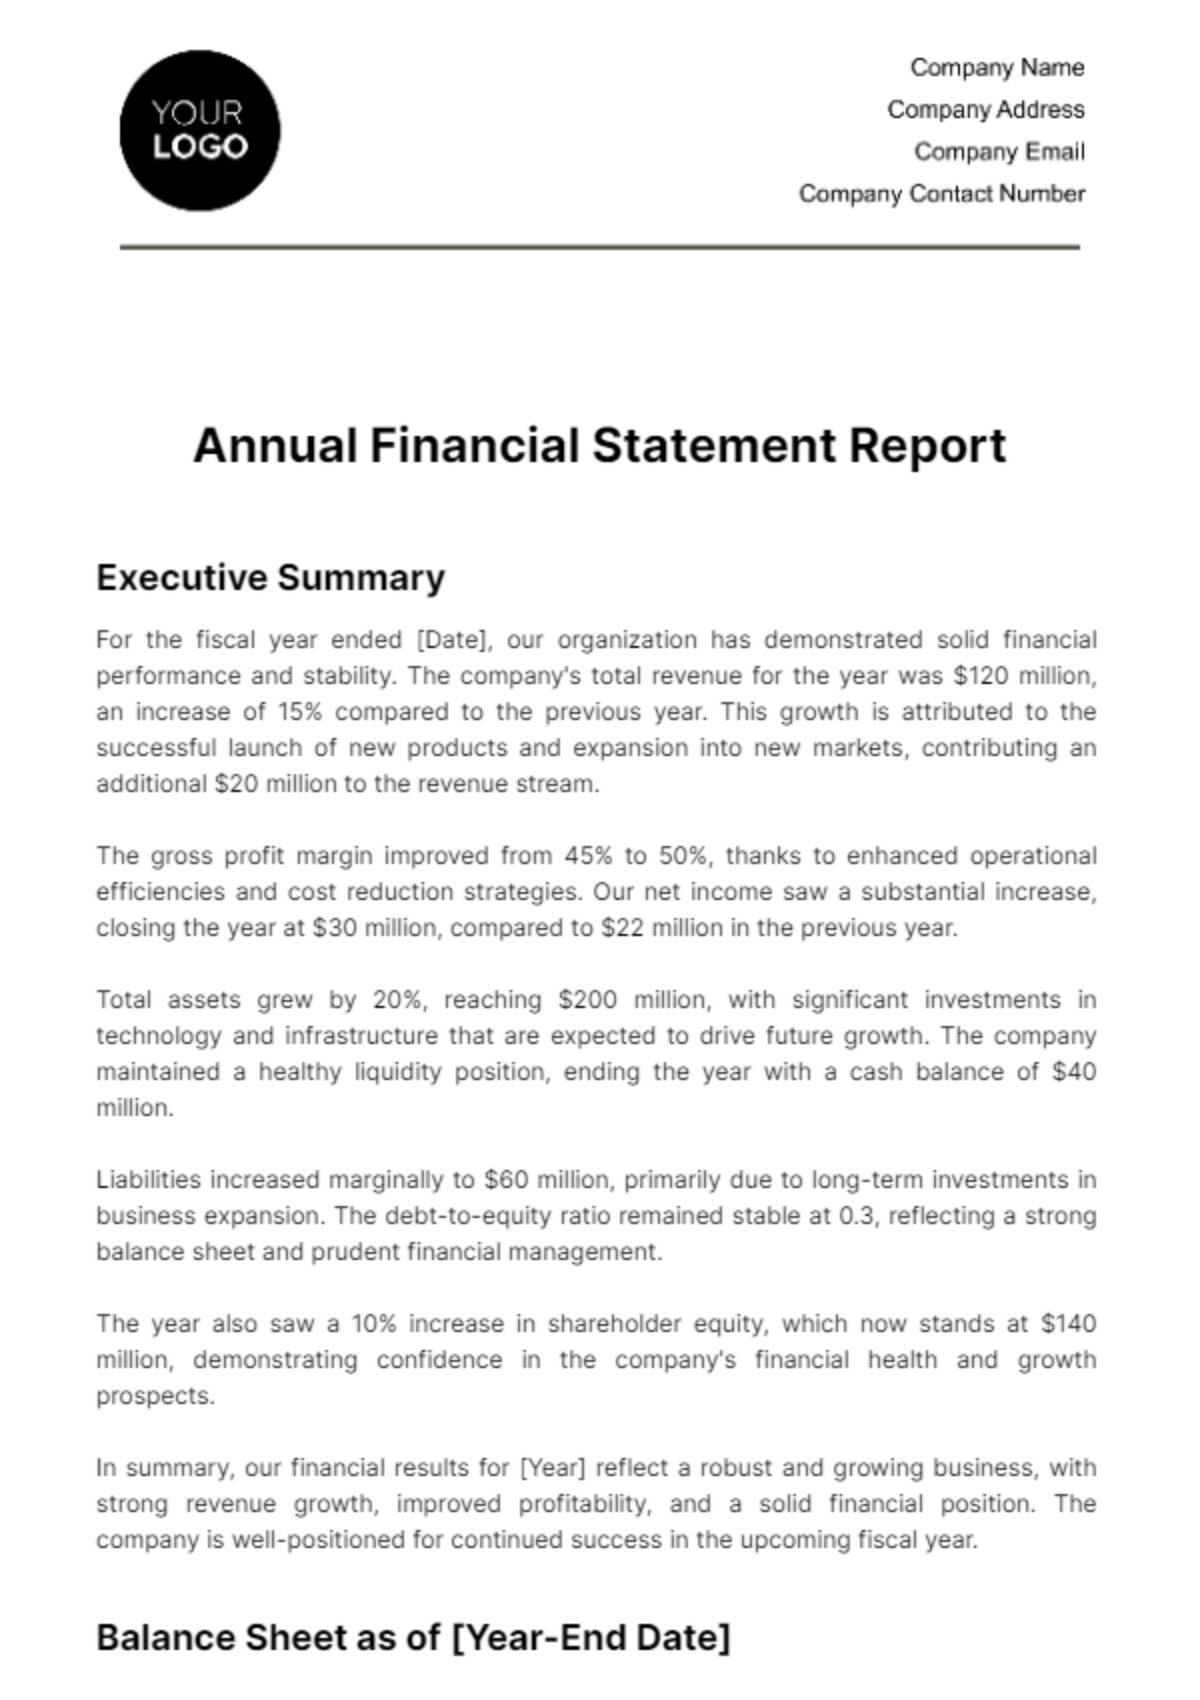 Free Annual Financial Statement Report Template